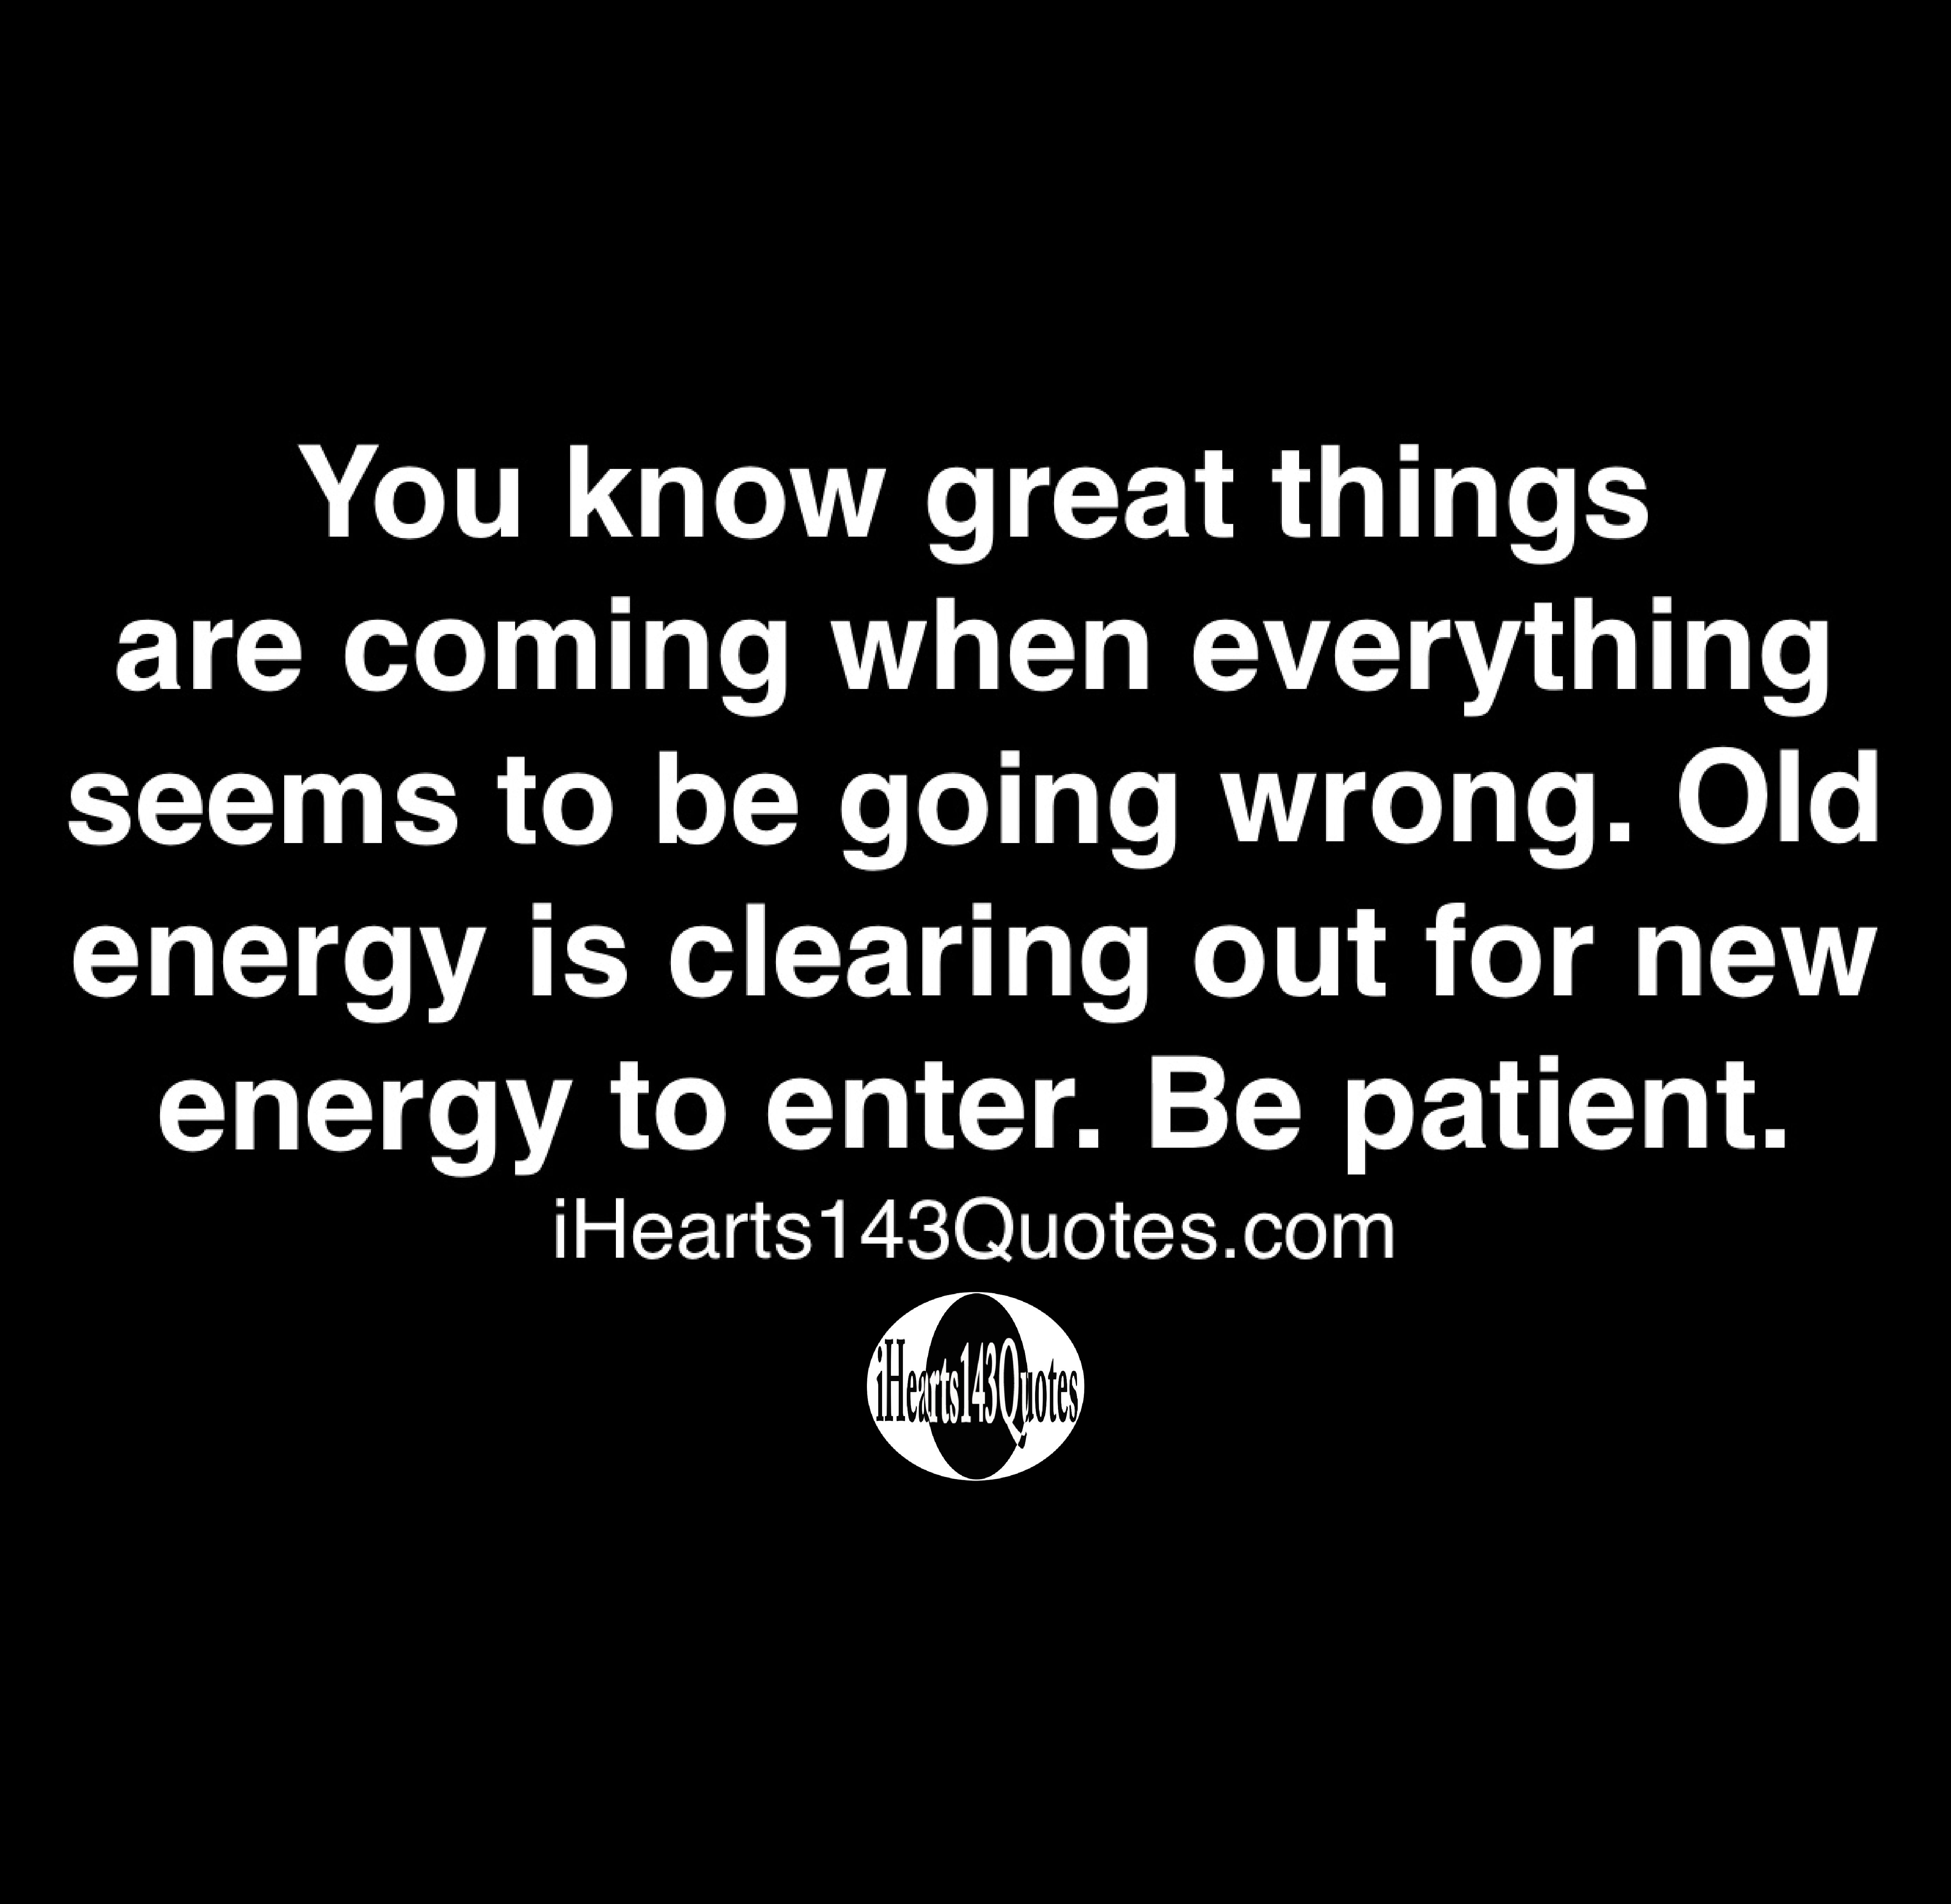 You Know Great Things Are Coming When Everything Seems To Be Going Wrong. Old Energy Is Clearing Out For New Energy To Enter. Be Patient - Quotes - Ihearts143Quotes